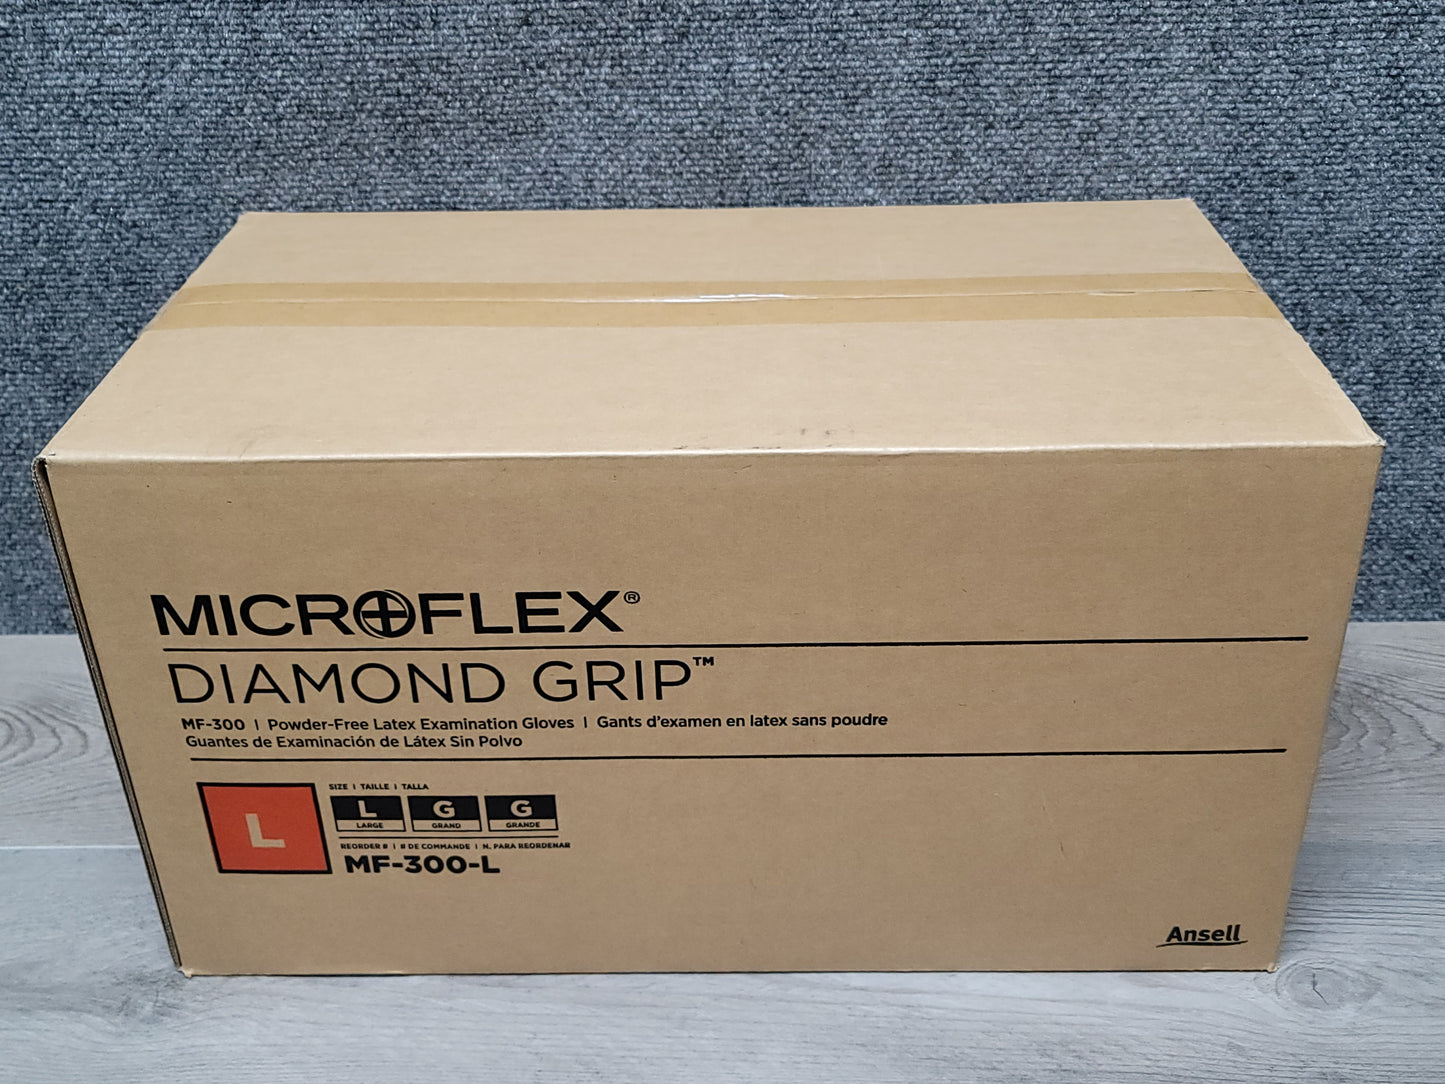 MIcroflex Diamond  Grip Large 10 boxes of 100 Count  Latex Gloves